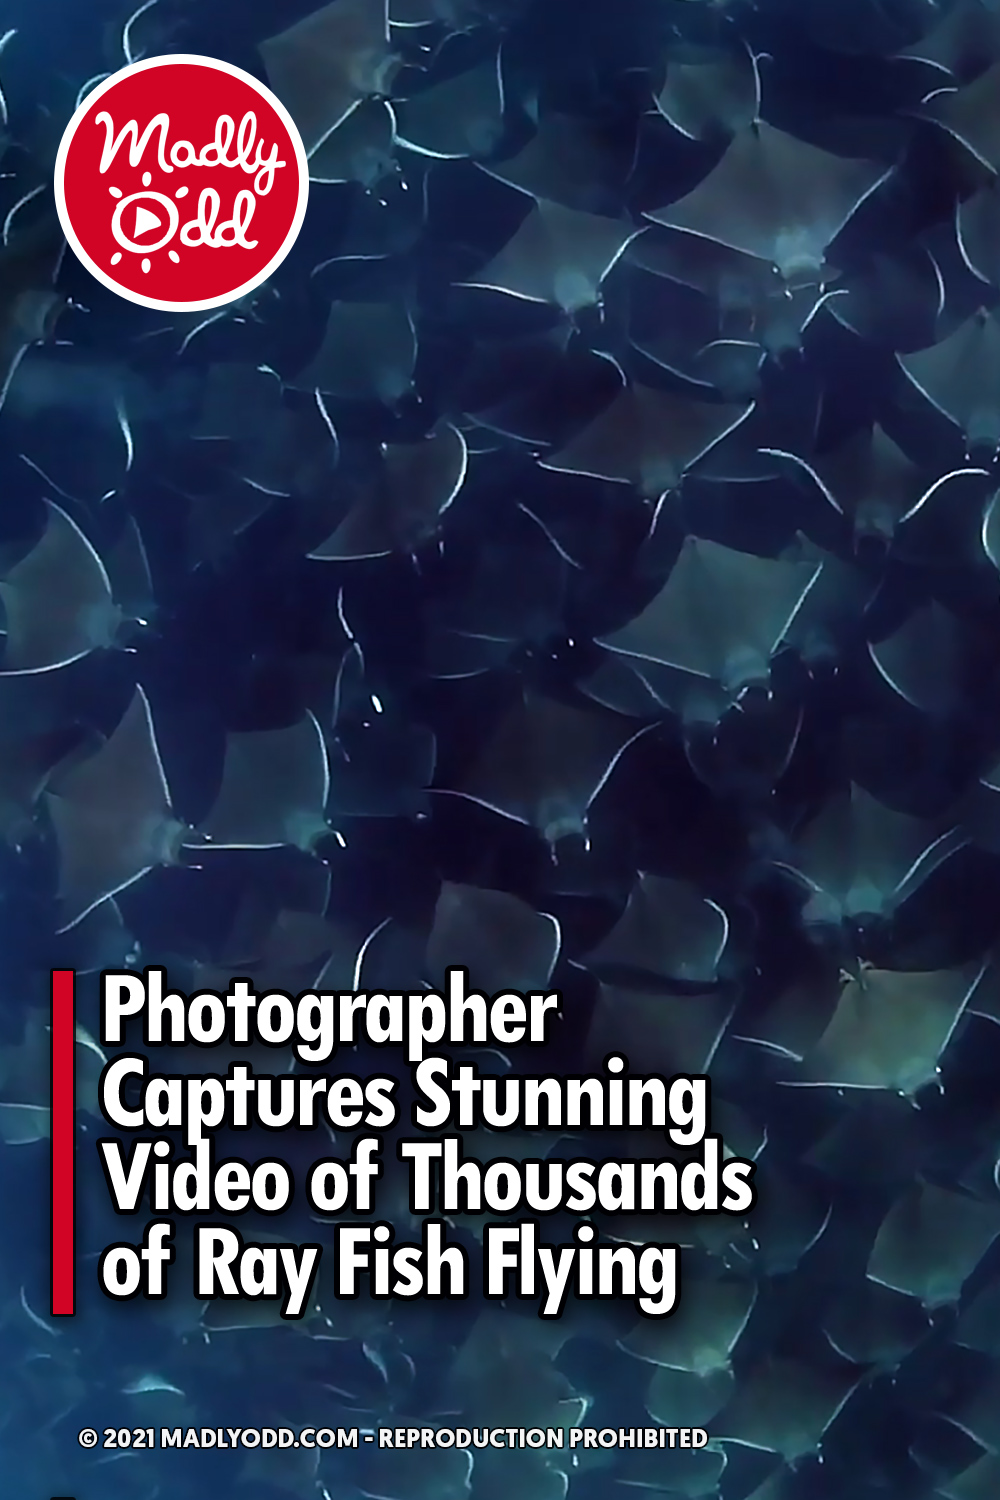 Photographer Captures Stunning Video of Thousands of Ray Fish Flying